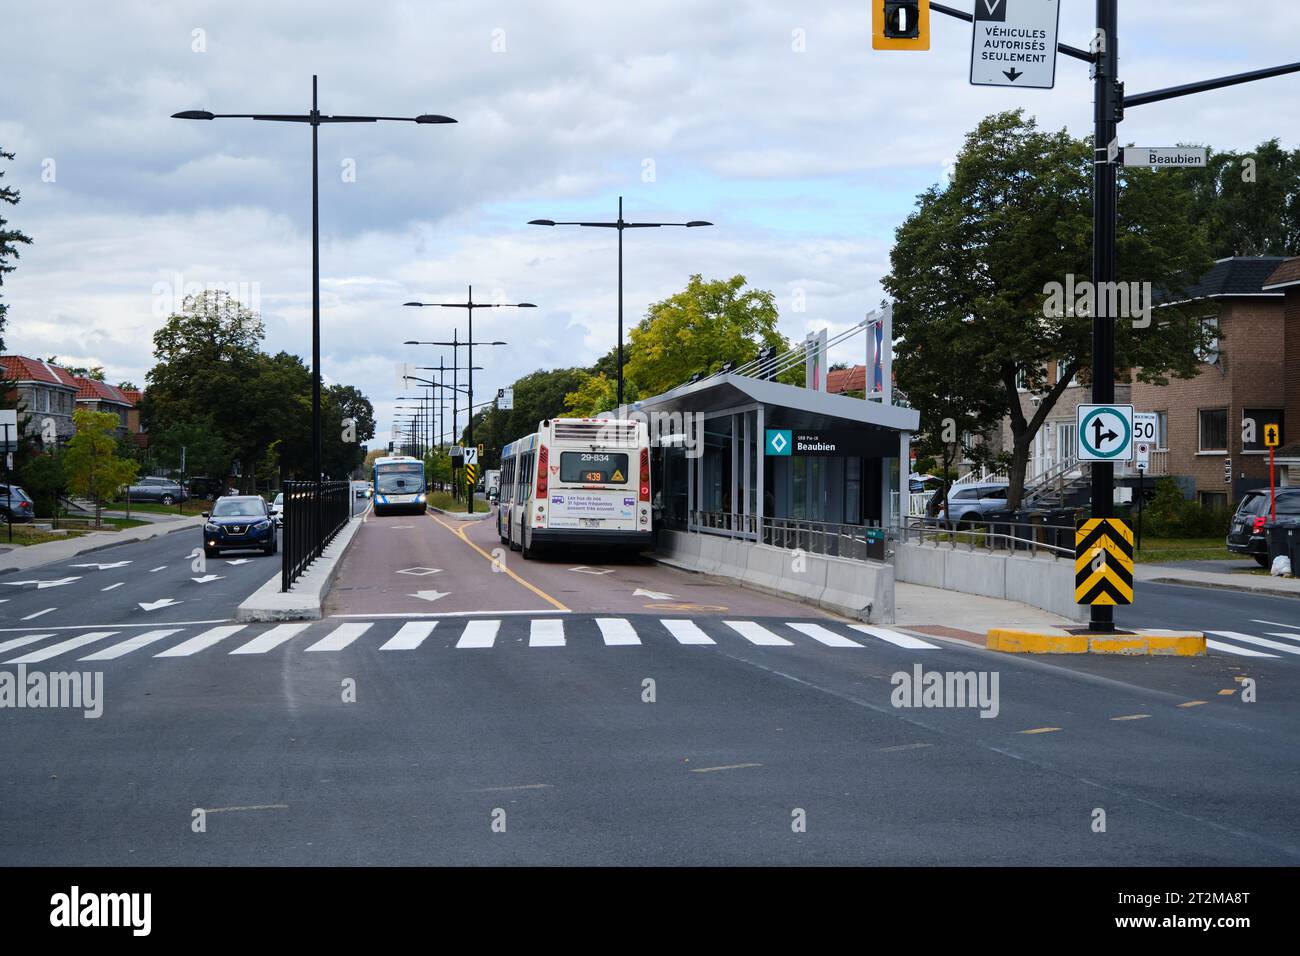 Pie-IX BRT is a bus rapid transit stop at Beaubien, with Bus in dedicated lane, part of Montreal Transit system Stock Photo